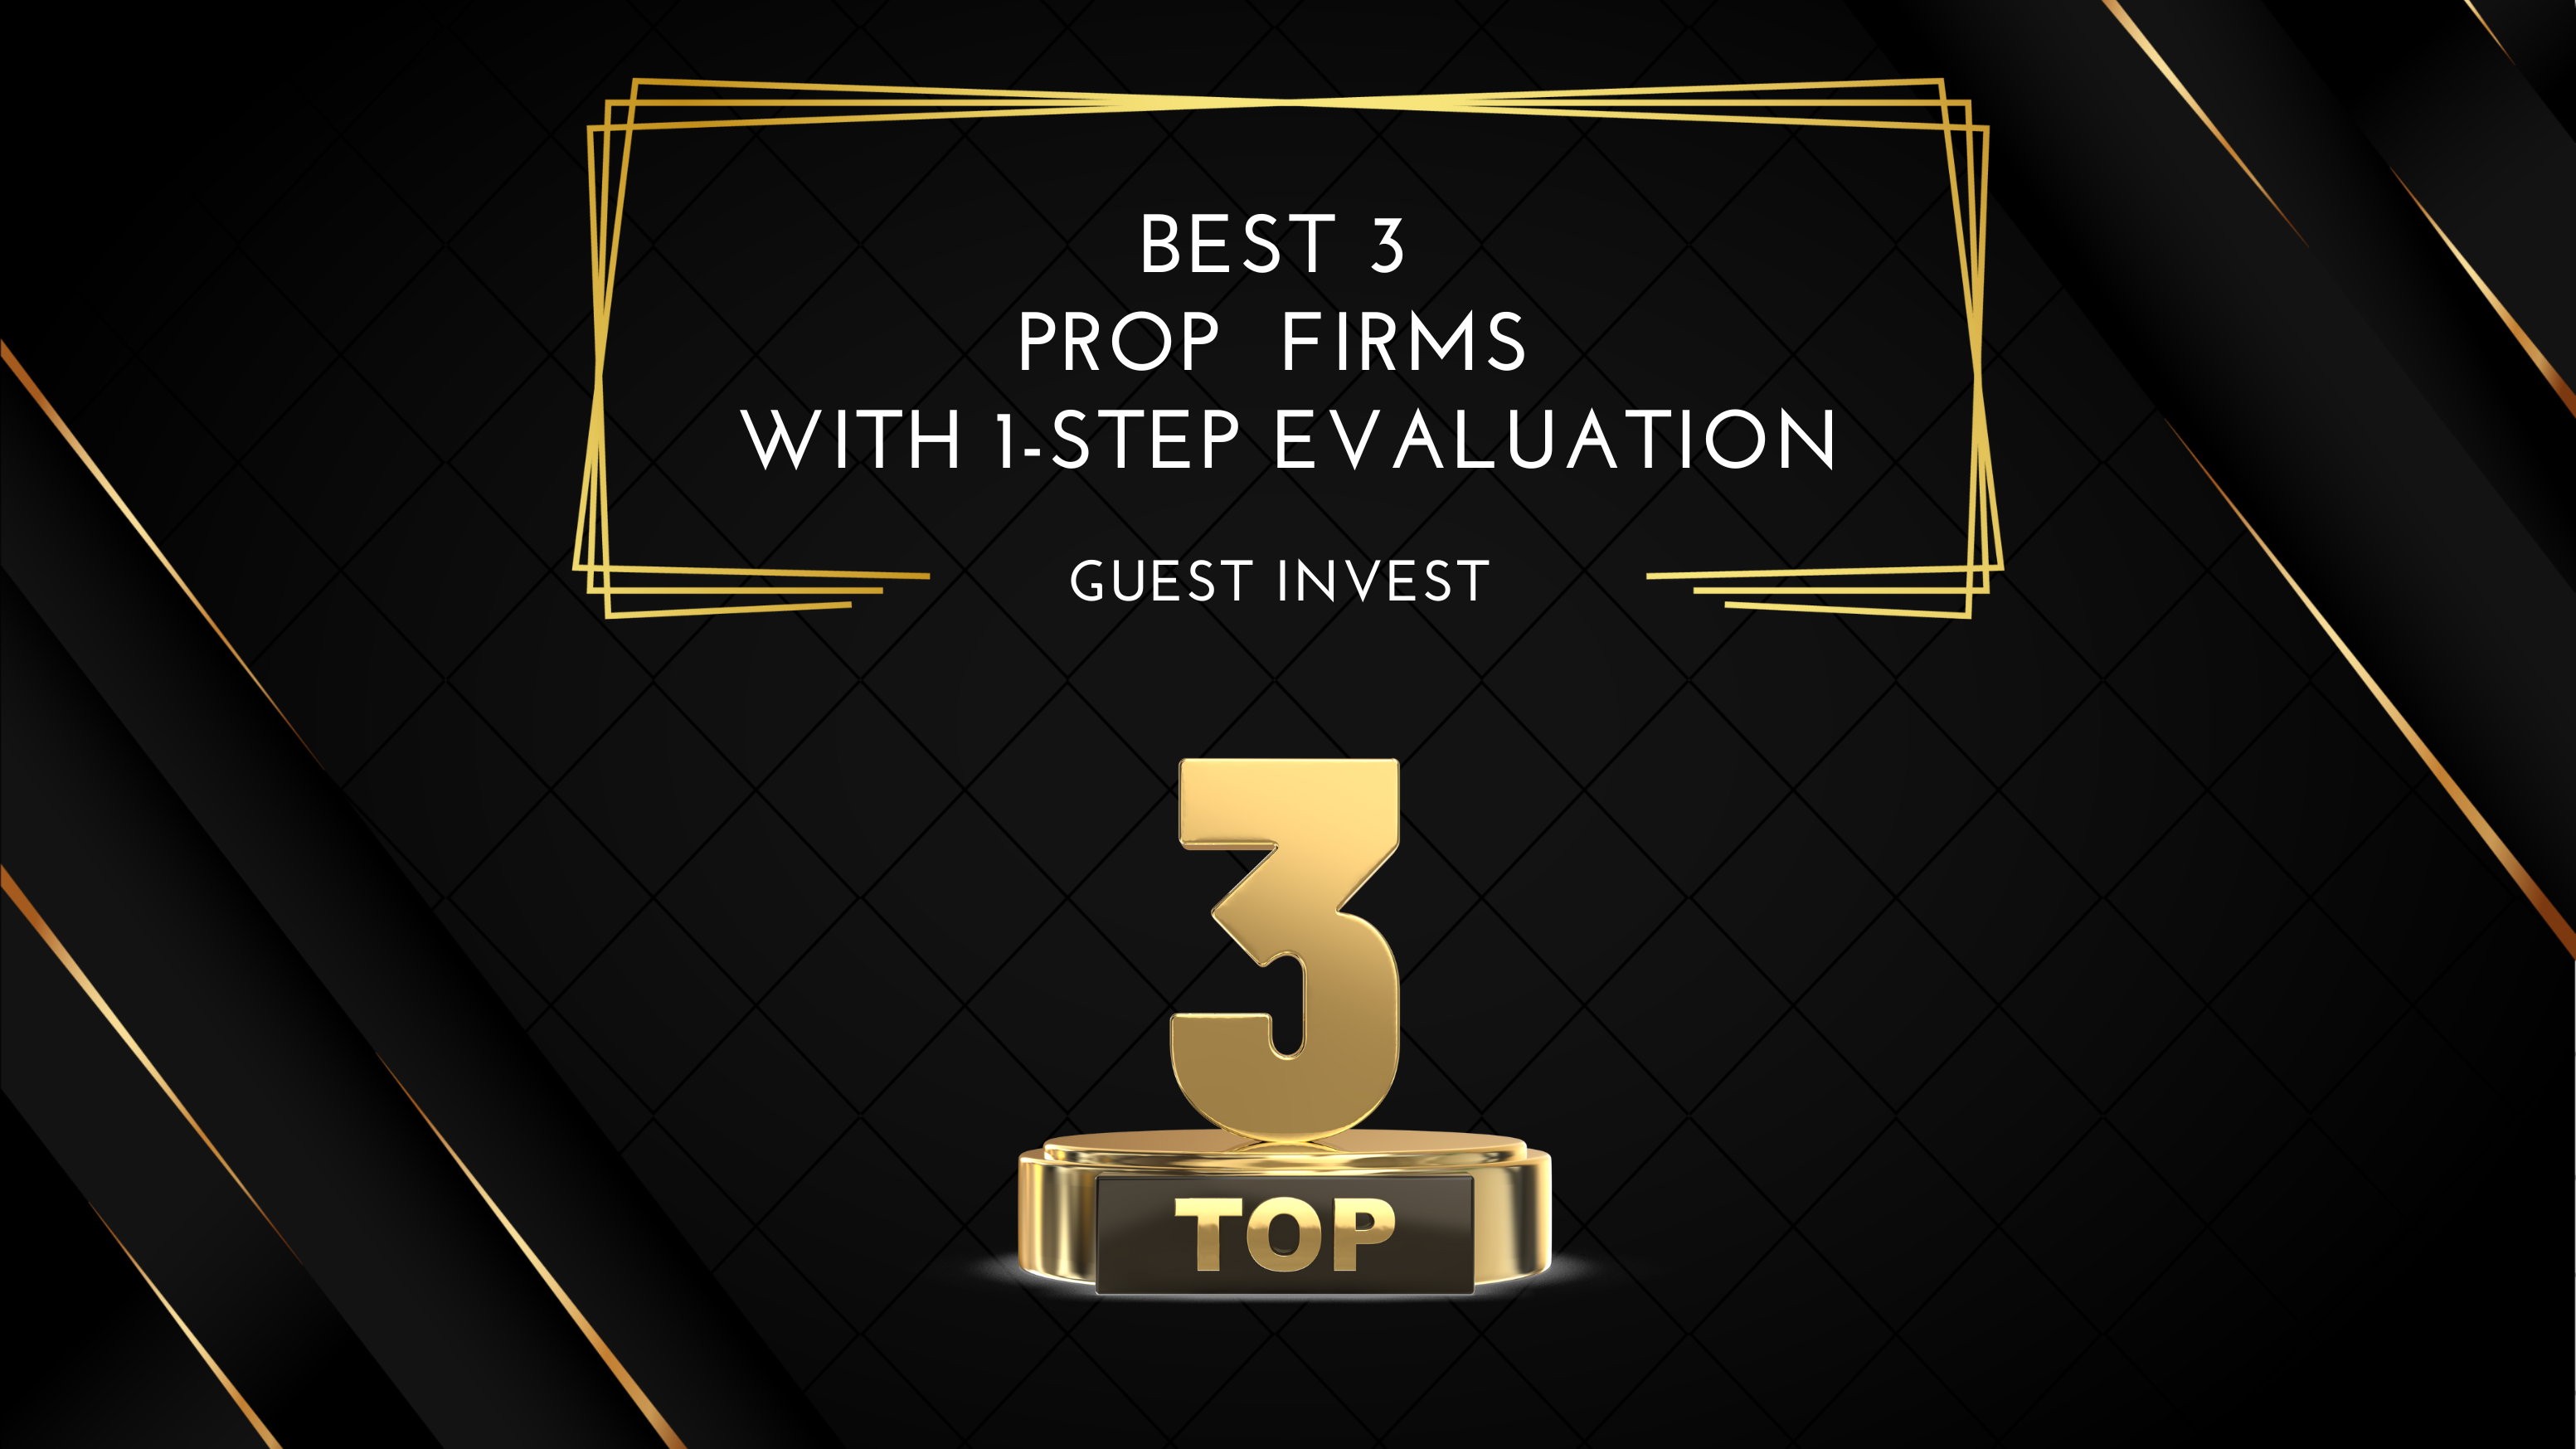 The best 3 prop trading firms with 1-step evaluations for simplified assessments and quick entry.